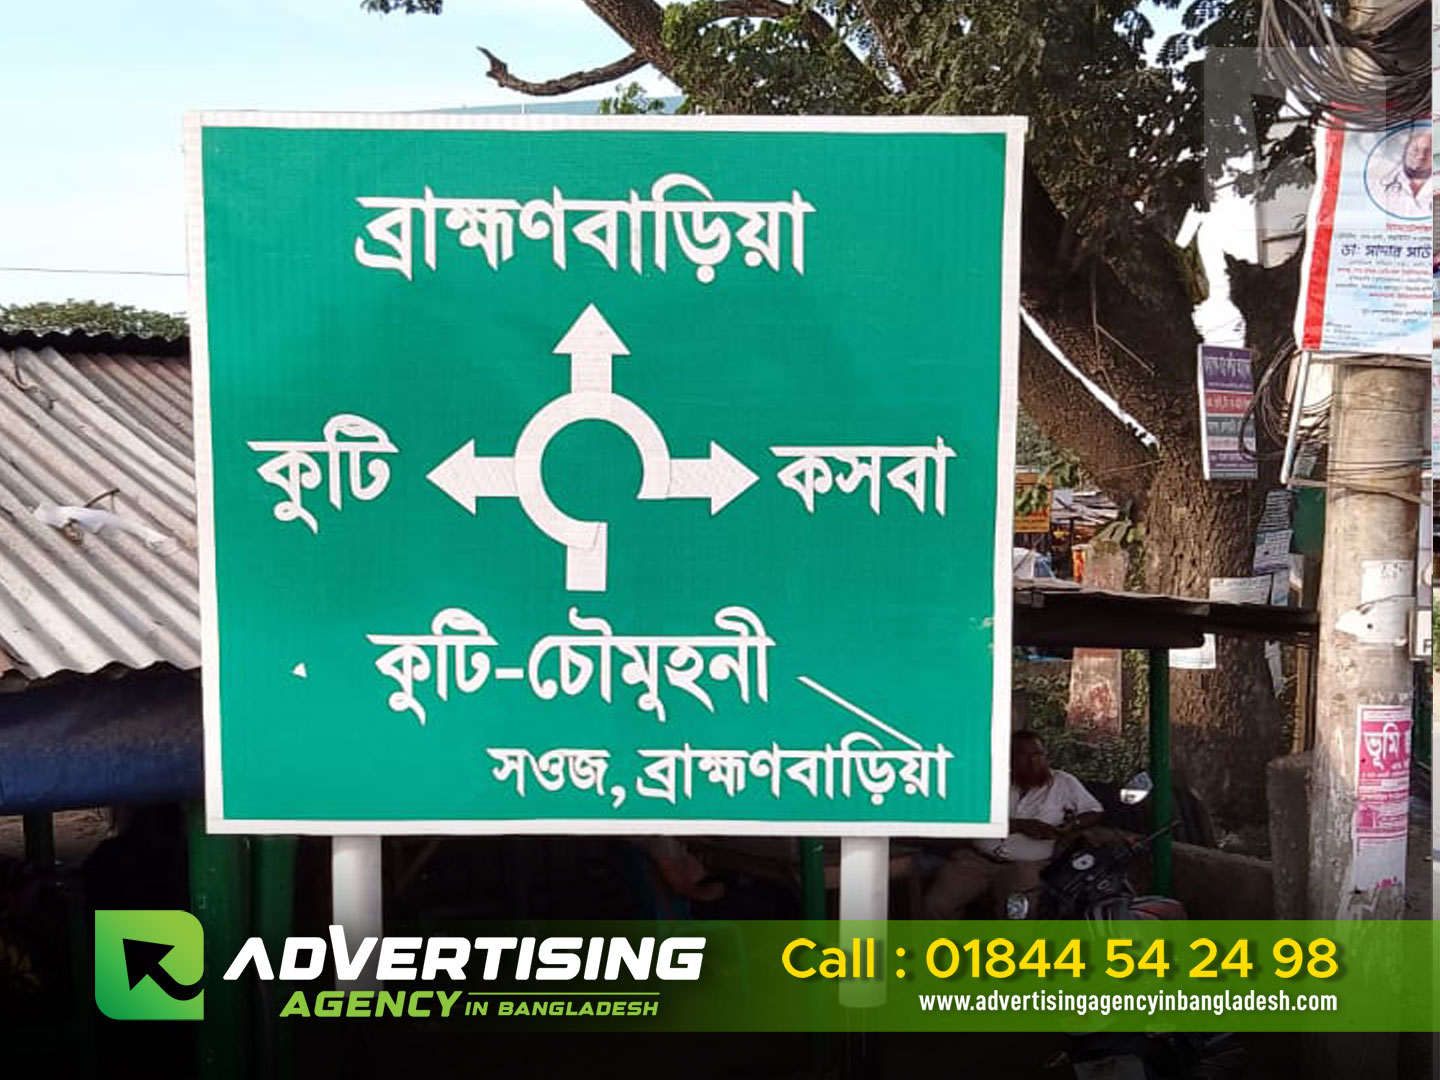 Bangladesh road sign symbol in an advertising agency in BD Bangladesh road sign symbol in an advertising agency in Bangladesh. Road sign name. Street sign height. Highway sign name. Road district nameplate. Bangladesh highway. Road Signs With Names. 5 street signs with names. Street signs and names. Road signs with names and meanings. Road Signs And Their Names. Warning road signs with names. Road Sign With Name. Road signs. Images and names of road signs. Names of various road signs. Names and meanings of road signs. Photos of traffic signs and their names. Mutcd street name signs. All traffic signs with names. Bangladesh road sign symbol in an advertising agency in BD Bangladesh road sign symbol in an advertising agency in BD Dhaka Road signs with names in PDF format. Road signs with their names. Road signs with names. 10 traffic signs with names. Street sign name. All street signs and names. Different street signs with names. Road sign name. Highway plate. Road sign names and images. Photos of traffic signs and their names. 6 road signs with names. traffic signs and their names. Nameless traffic signs. Road signs and symbols with names. 10 traffic signs and their names. All traffic signs and their names. Some road signs and their names. Street sign with names in English. All traffic signs with their names. Yellow Road Signs With Names. Traffic sign name test. 15 street signs with names. Road Signs With Names. Road Signs With Names In English. Yellow Road Sign Names. Road Sign Name With Images. Street signs with names and pictures. Road sign name. Advertising Agency in Bangladesh Traffic signs Bangladesh A road or highway billboard is a large, usually rectangular sign placed on the side of a road or highway that advertises a product or service to passing motorists. In Dhaka, the capital of Bangladesh, billboards are commonplace, advertising everything from mobile phones to soft drinks. Although some drivers find billboards boring, they can be an effective way to reach large numbers of people. With a well-designed billboard, businesses can generate a significant amount of exposure and traffic. Road signs in Bangladesh png images. Road signs in Bangladesh png images. (PDF) BANGLADESH ROAD SIGNS MANUAL. Manufacturer of traffic signs in Bangladesh. Road signs in Bangladesh transparent background PNG. Manufacture and marking of traffic signs in Dhaka, Bangladesh. Traffic signs in Bangladesh PNG Images. Best Digital Signage Companies in Bangladesh. Traffic sign recognition in Bangladesh based on DtBs vector. Road sign manufacturing company in Dhaka, Bangladesh. Best Outdoor Advertising Companies in Dhaka, Bangladesh. Billboard Creates and takes over advertising branding. Billboard Advertising Agency in Bangladesh. Advertisement Agency in Bangladesh Best Sign Manufacturers in Dhaka. Realization of road signs and branding in Dhaka, Bangladesh. Road signs in Dhaka, Bangladesh. Project Wall Sign Signage Bangladesh, Street. Branding for offices, hospitals, malls and streets. Road signs Bangladesh – Online education.